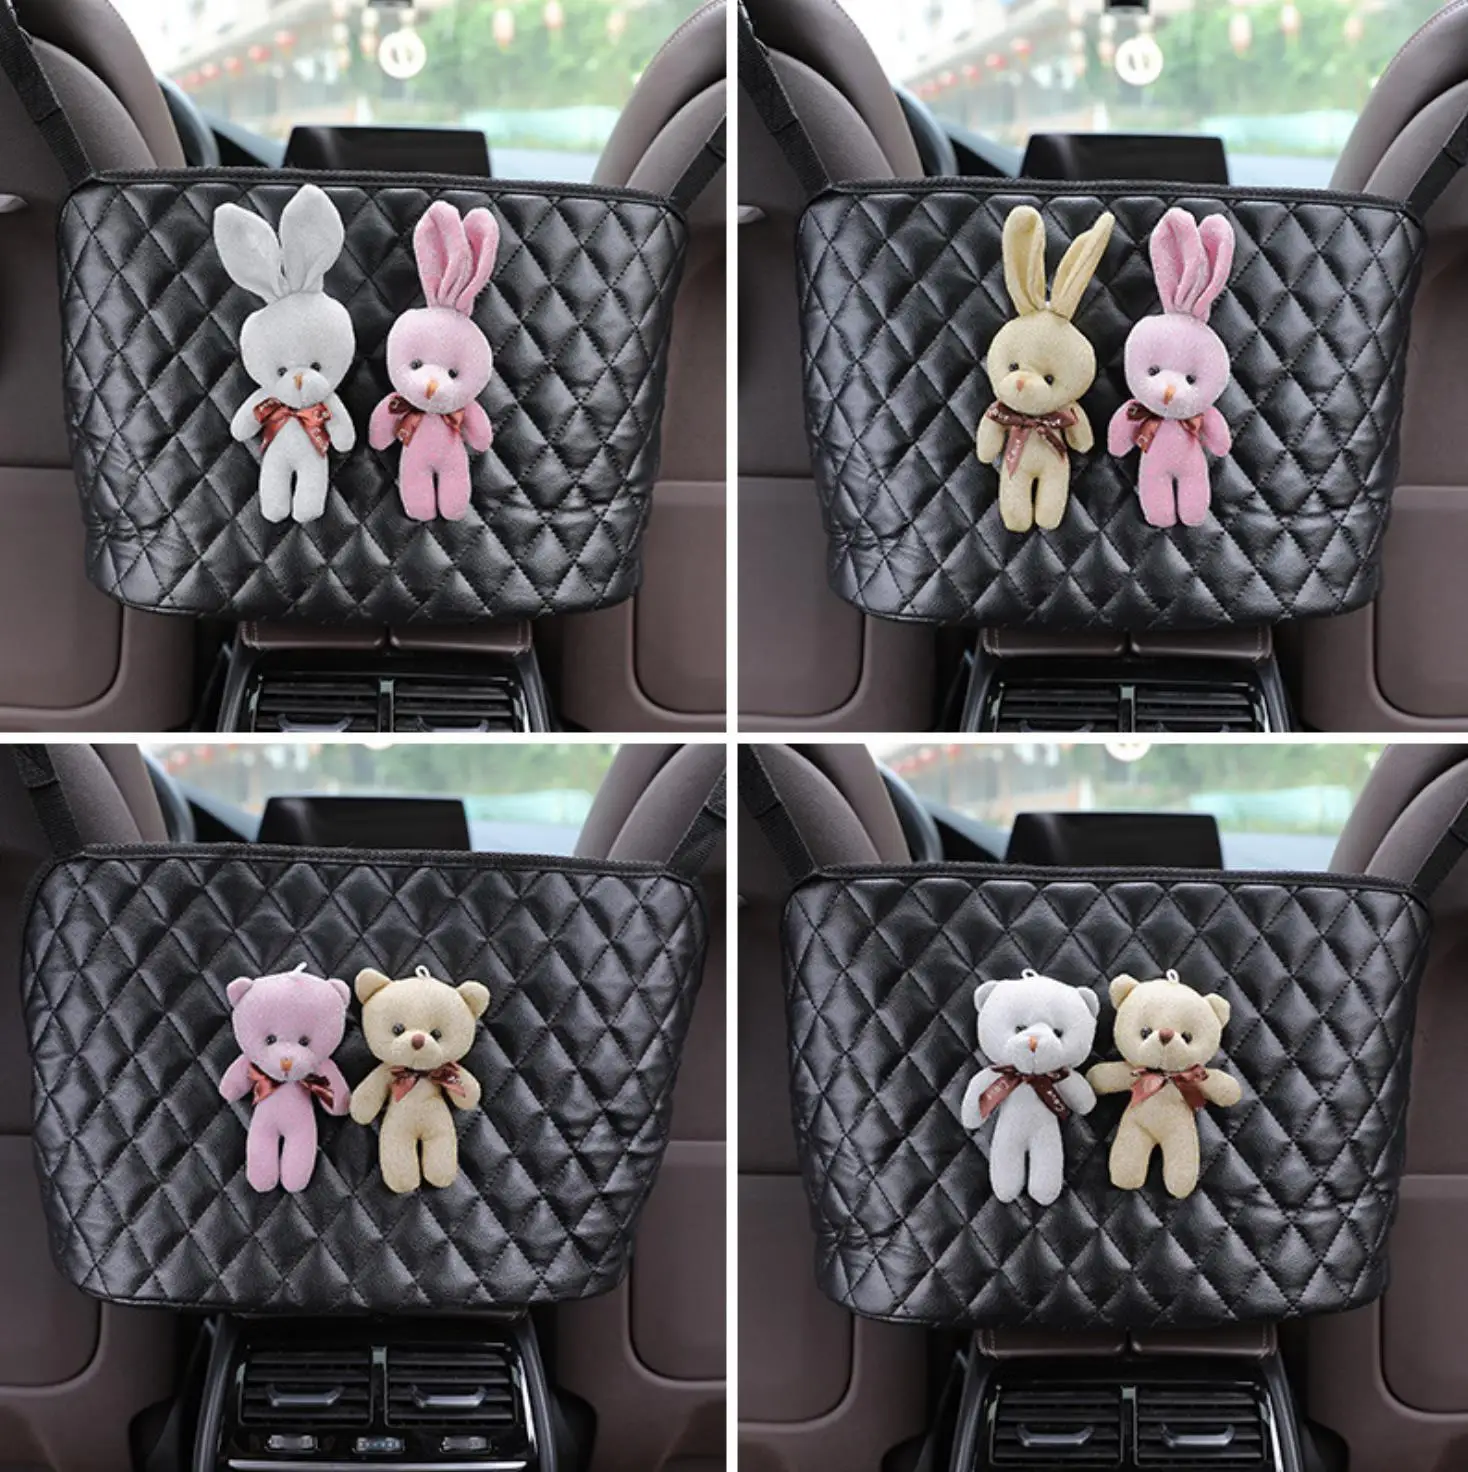 yicheyiyou Purse Holder for Cars Between Seats， Barrier of Backseat Pet Kid